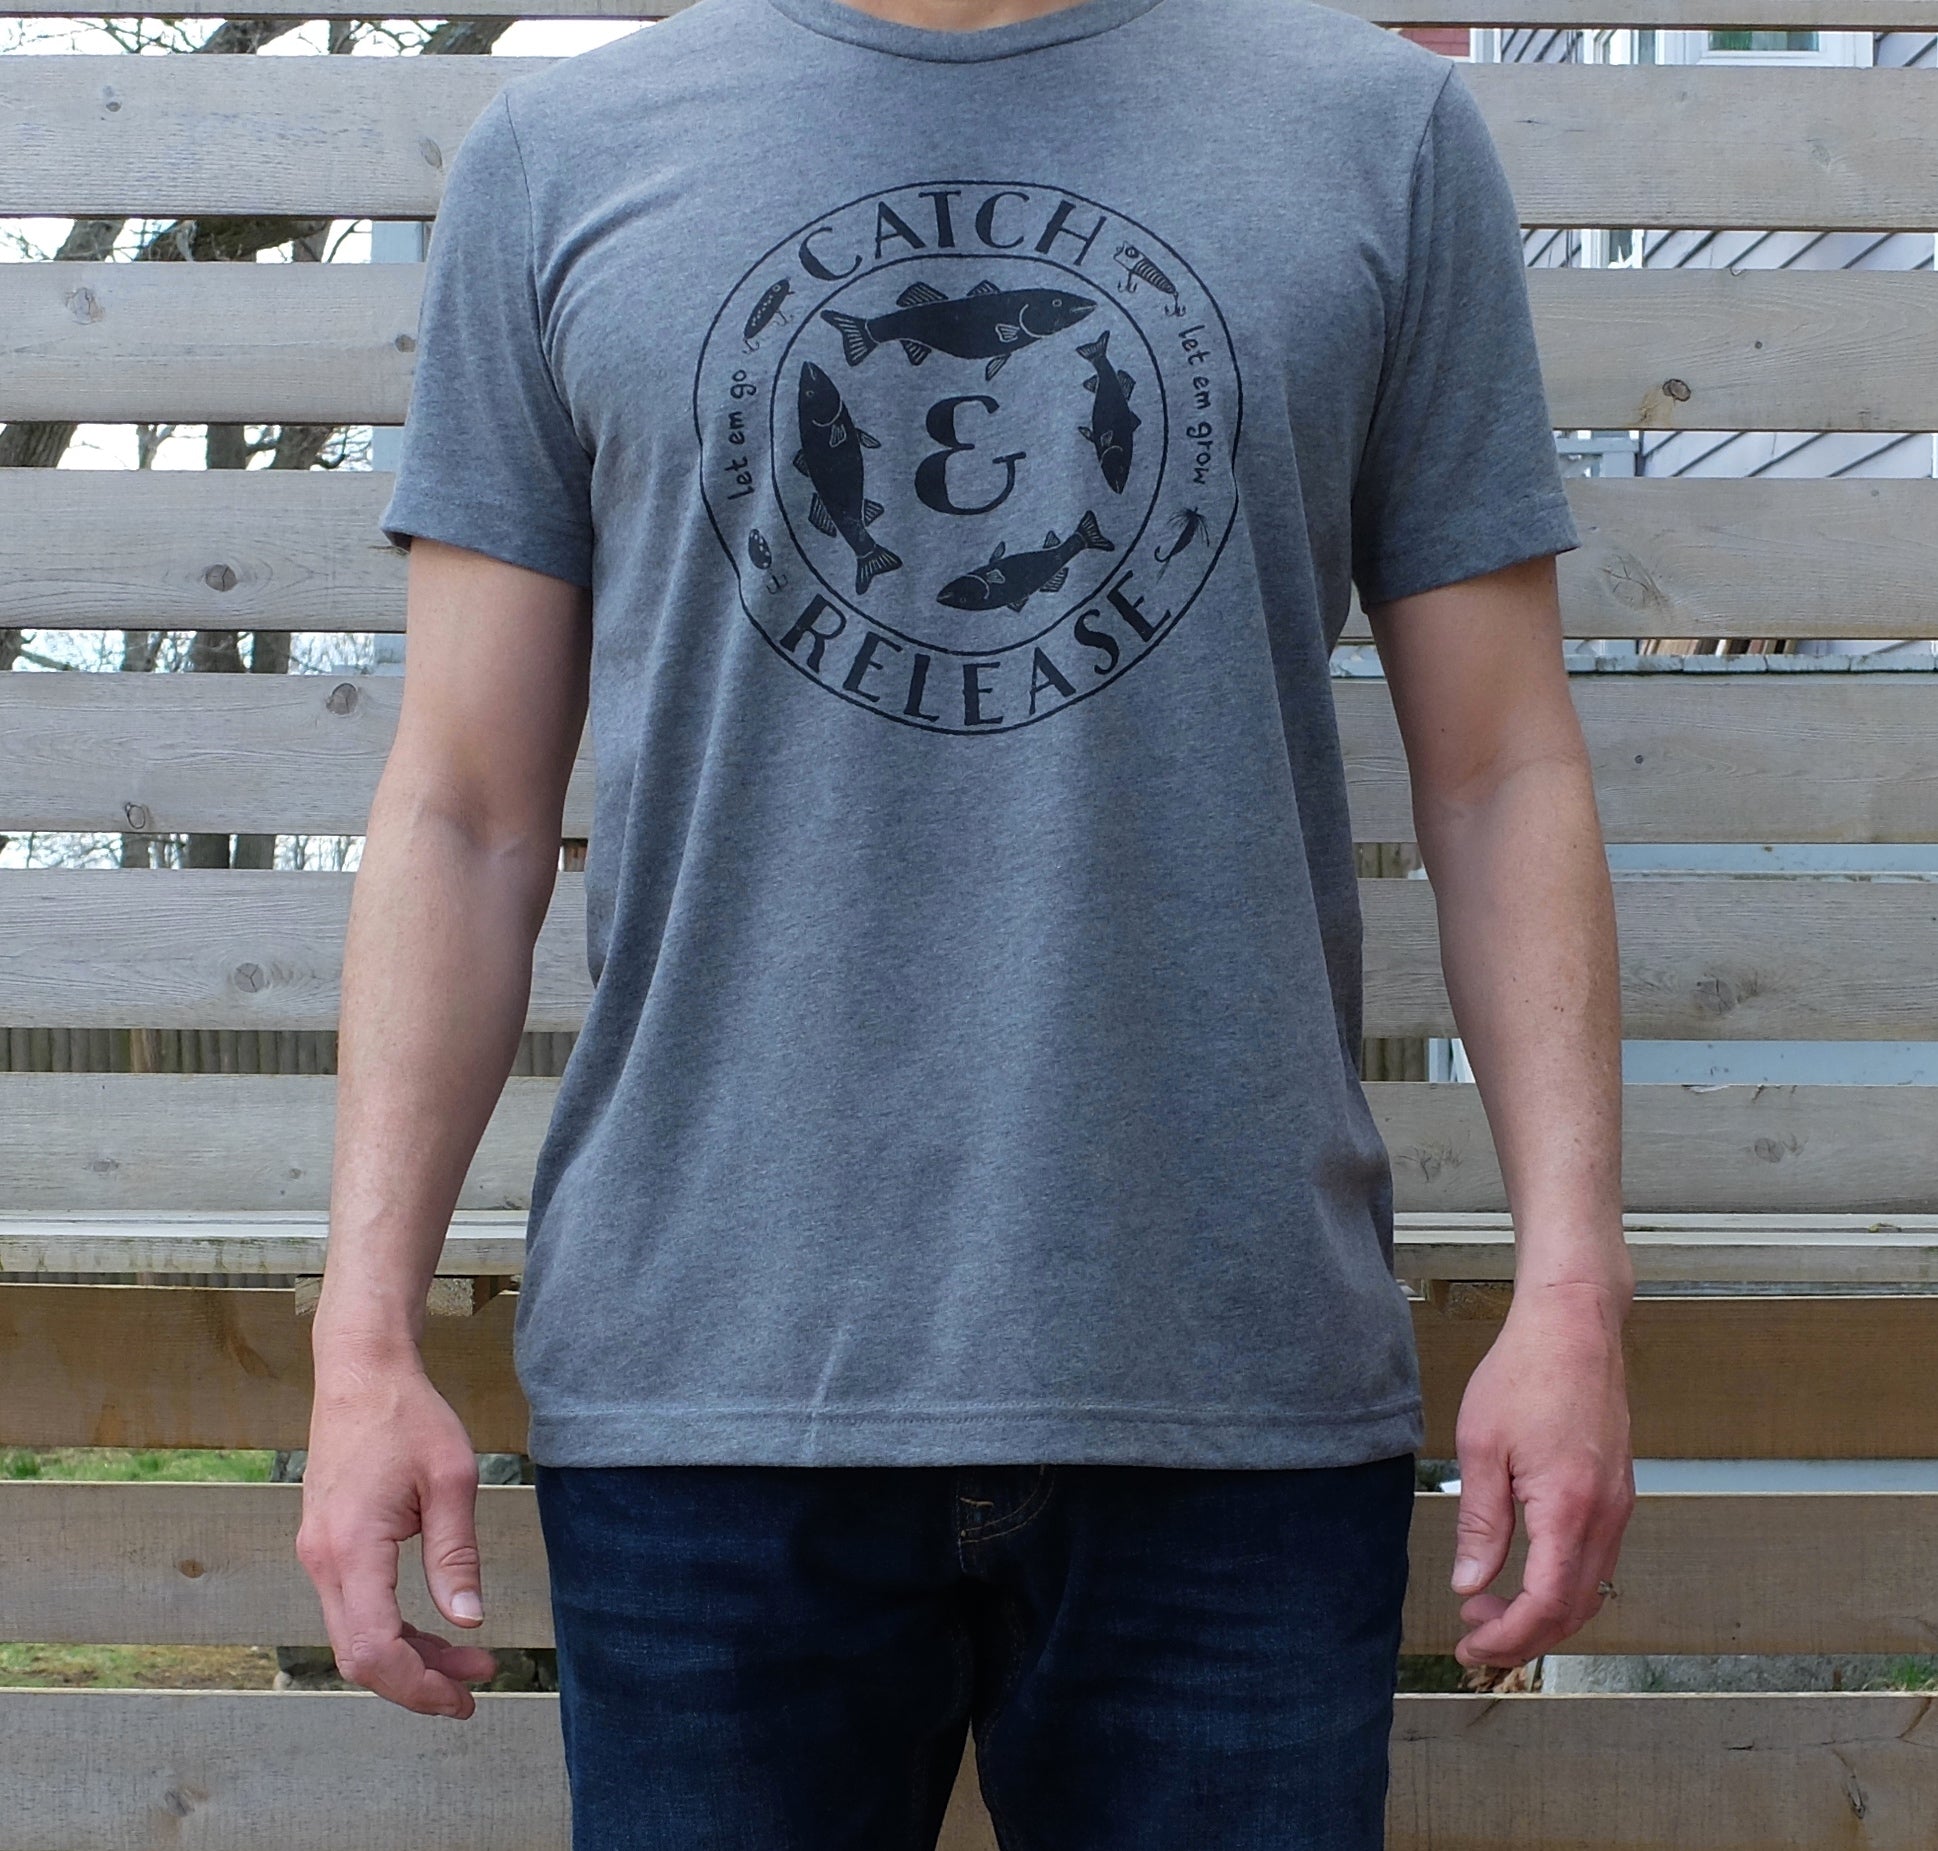 man wearing heather grey t-shirt with round vintage style 'Catch and Release' fishing graphic